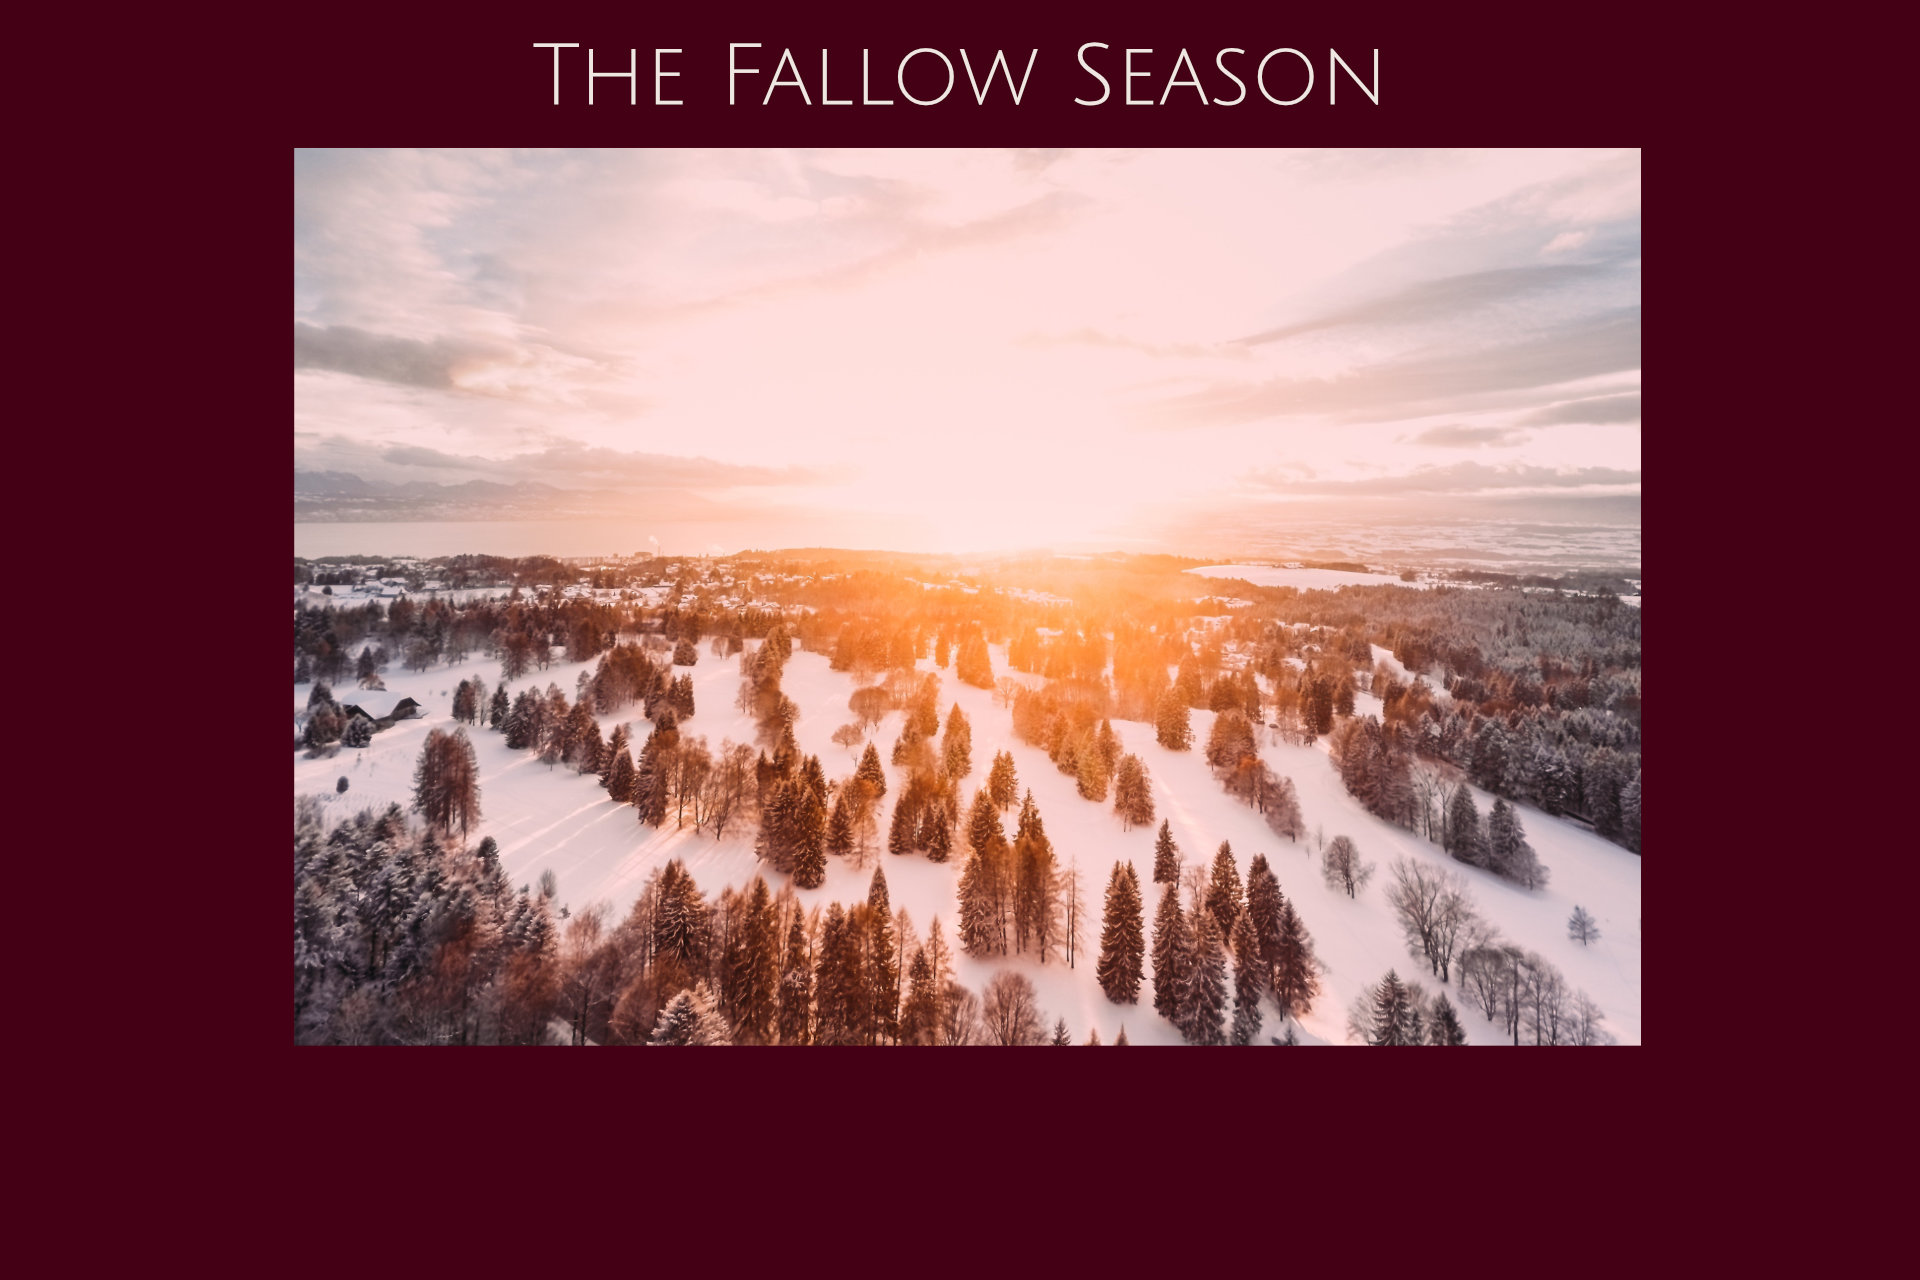 Bird's eye view of a snowy forest landscape with the rising sun on the horizon, text "The Fallow Season"